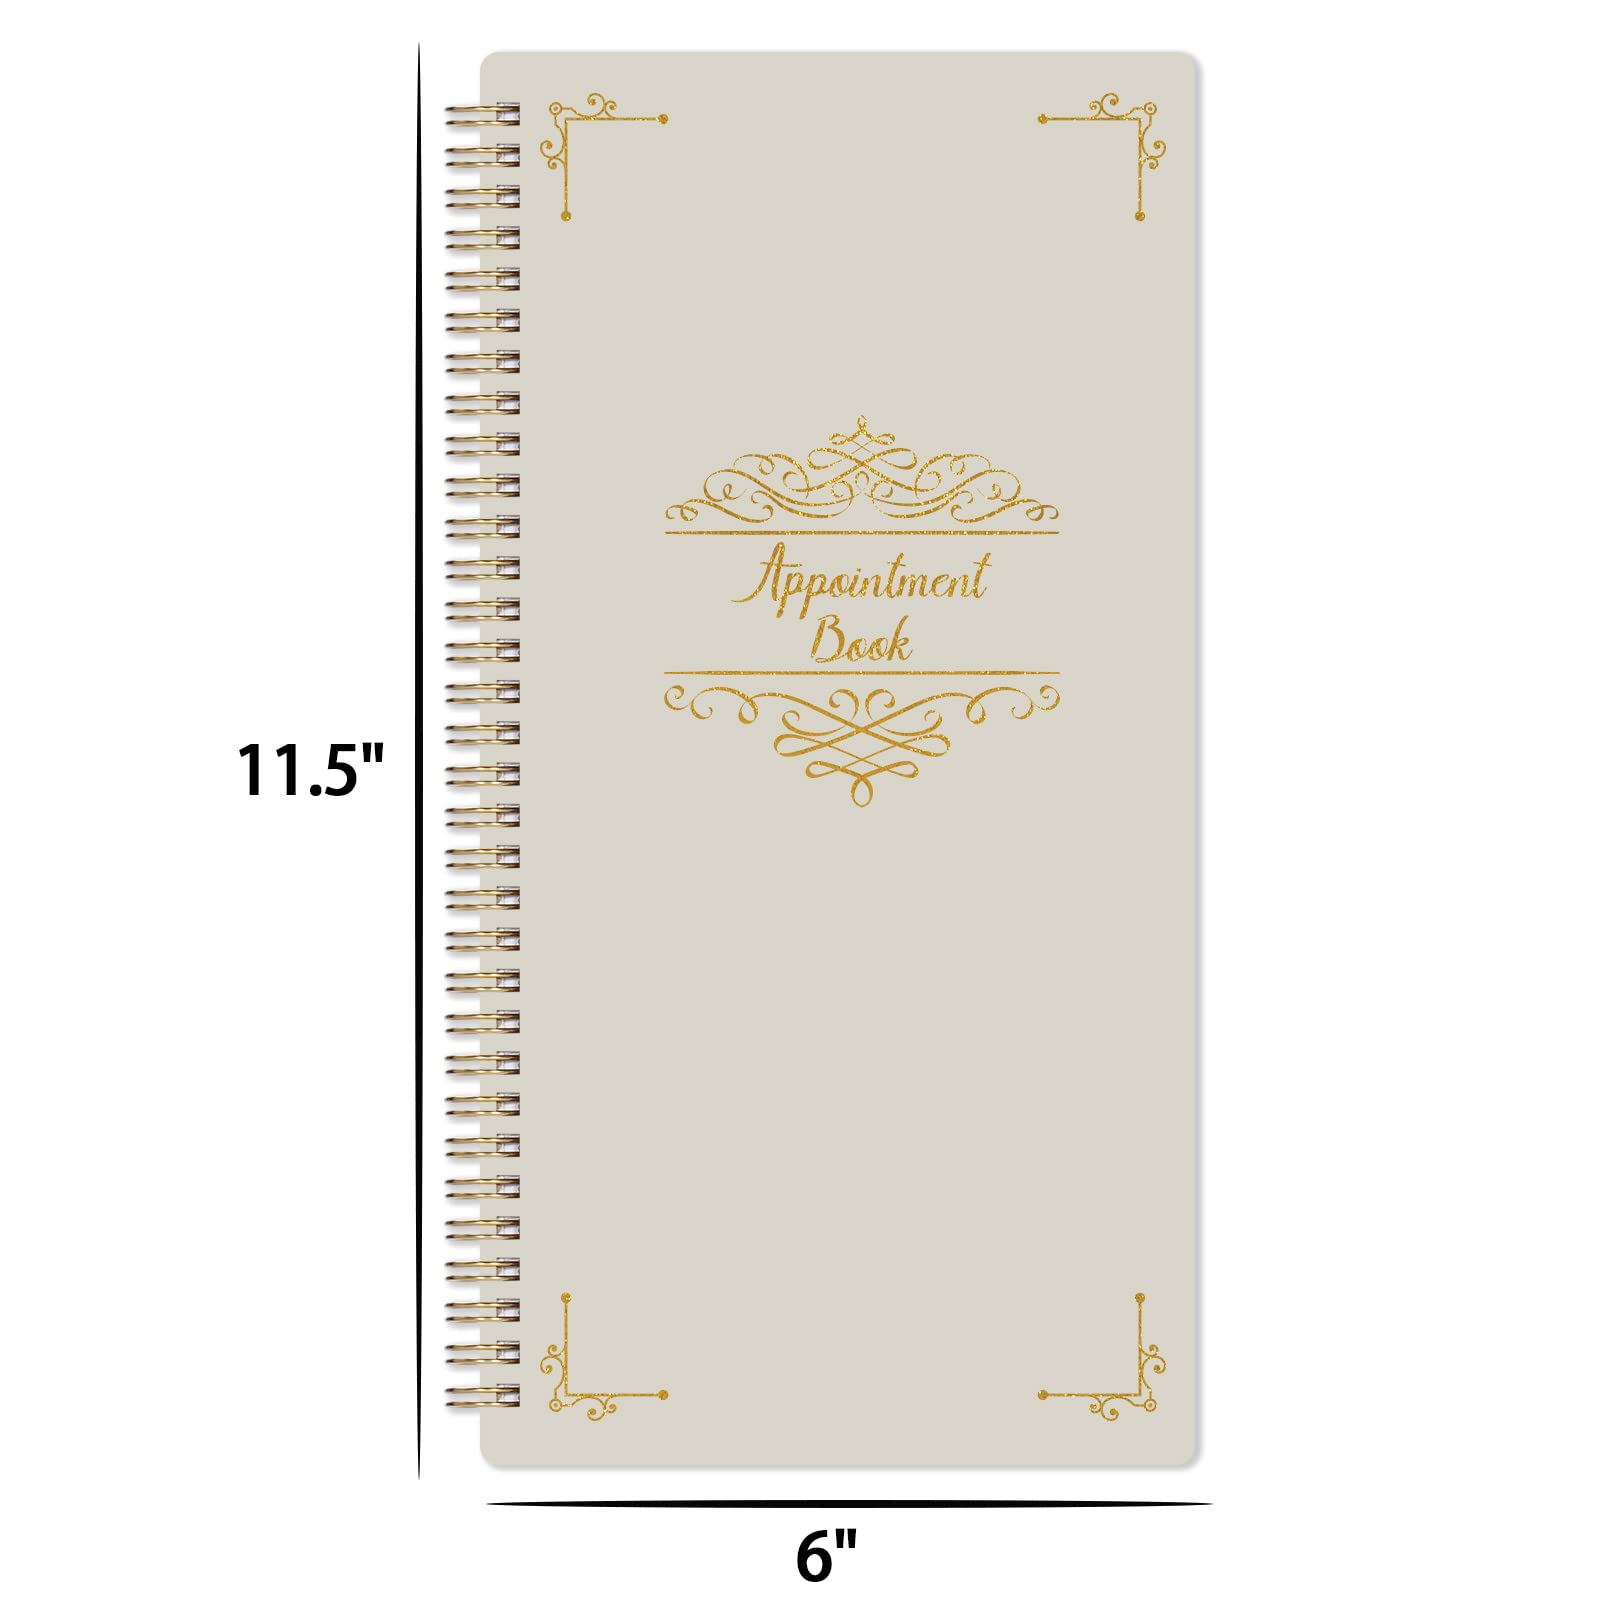 Appointment Book – Undated Salon Appointment Book, Daily＆Hourly Schedule Book with 200 Pages, 6 AM - 9 PM, 15 Minute Intervals Day Planner, 6’’ x 11.5’’, 3 Column, Twin-Wire Binding, Hardcover